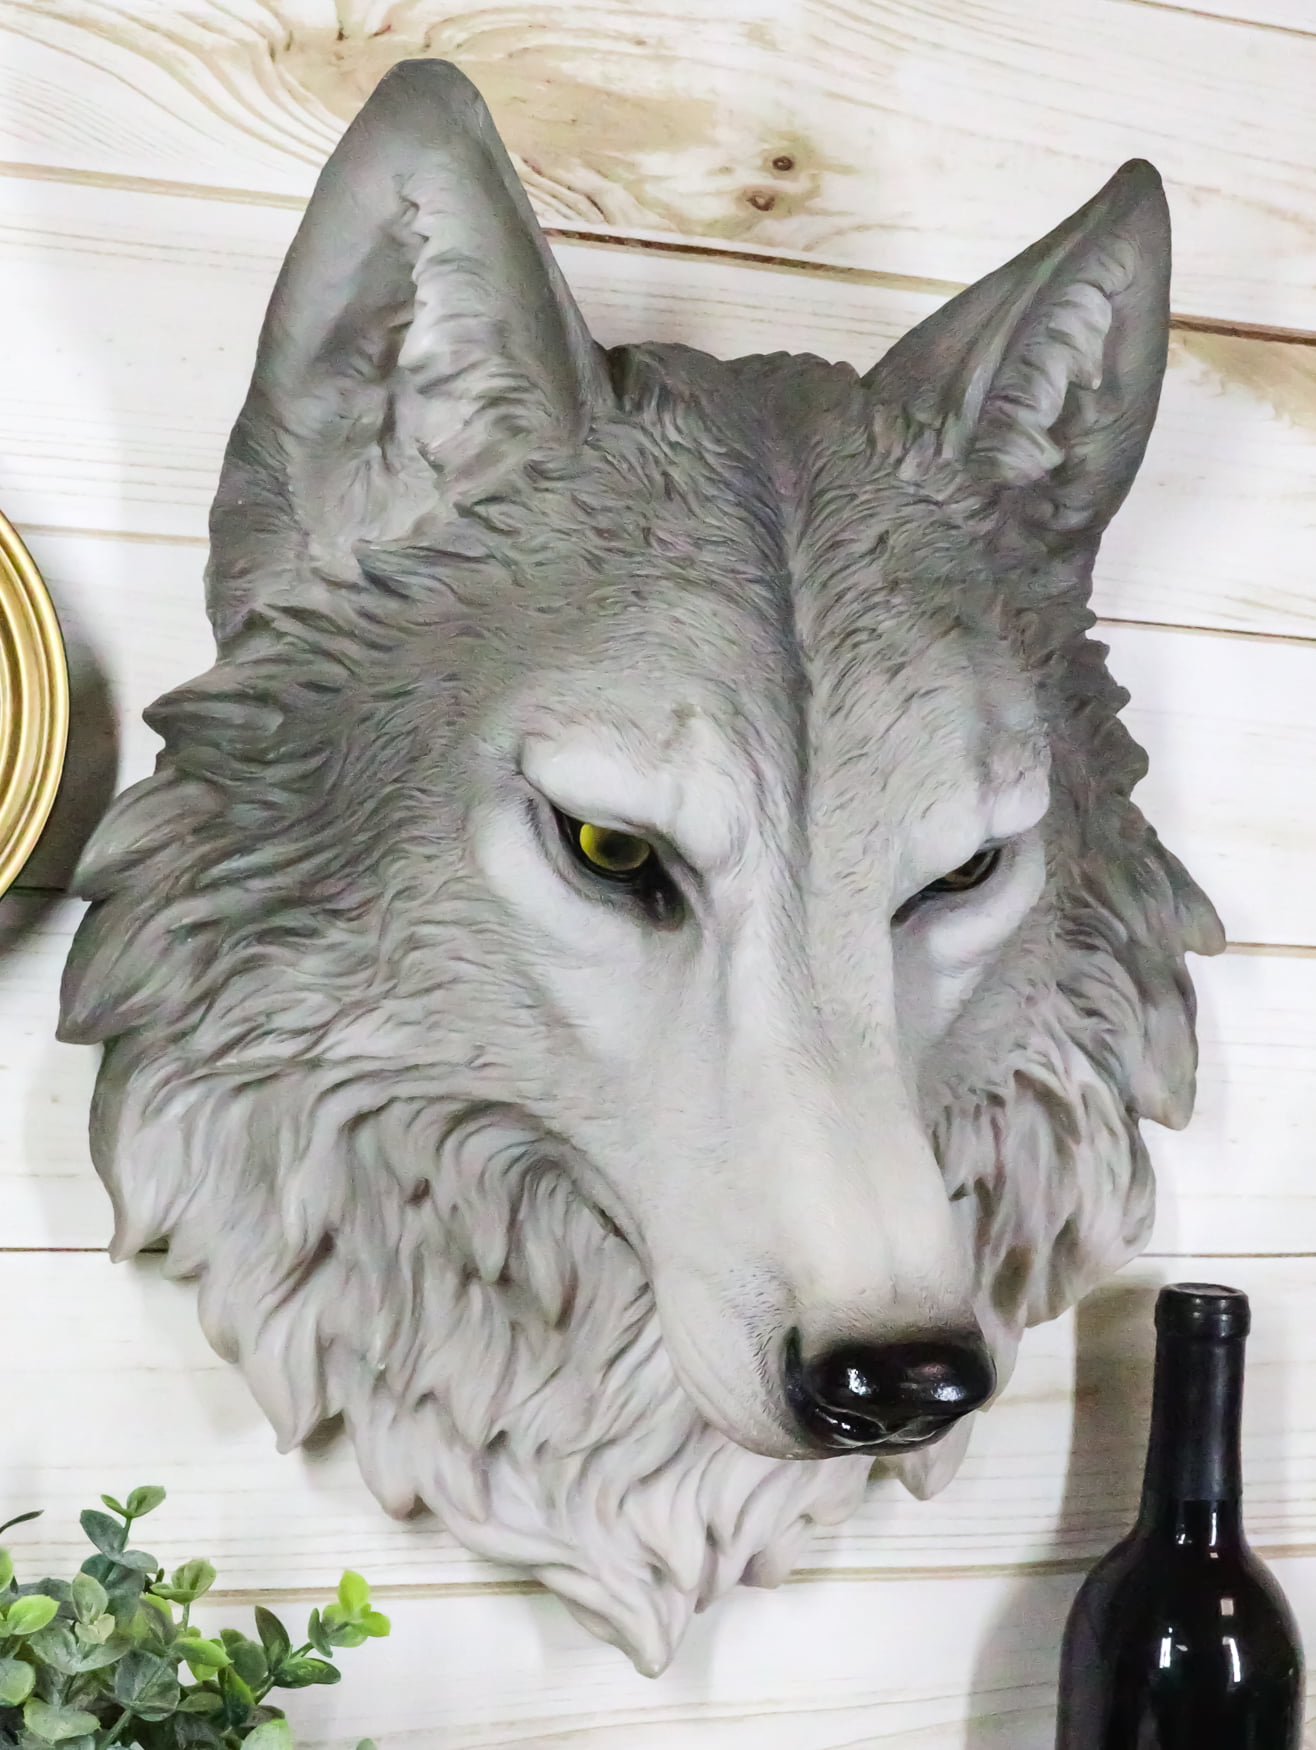 EXTRA LARGE Timber Wolf Wall Plaque Hanging Figurine Home or garden waterproof 